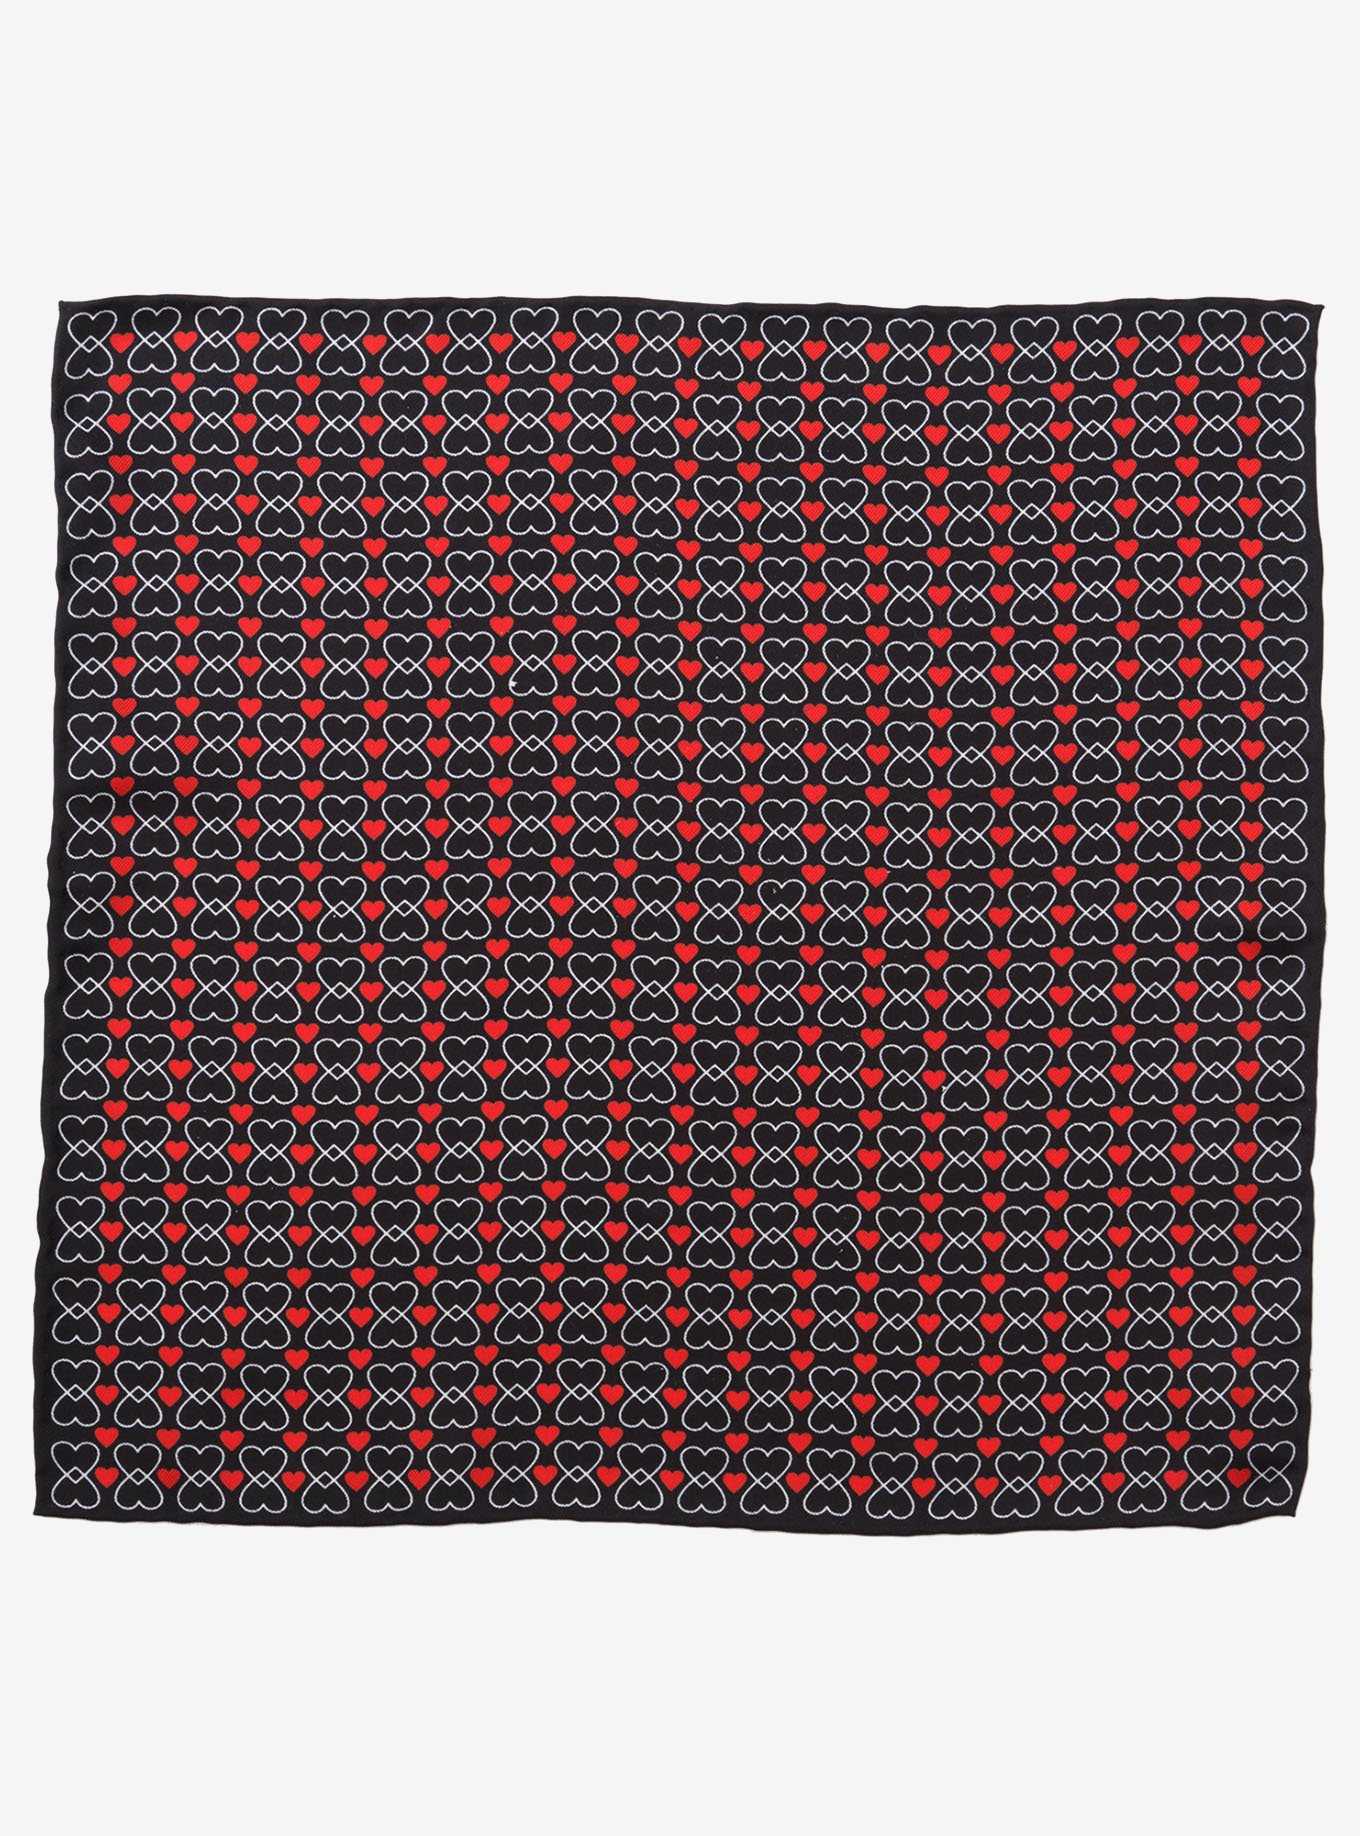 Intertwined Hearts Pocket Square, , hi-res